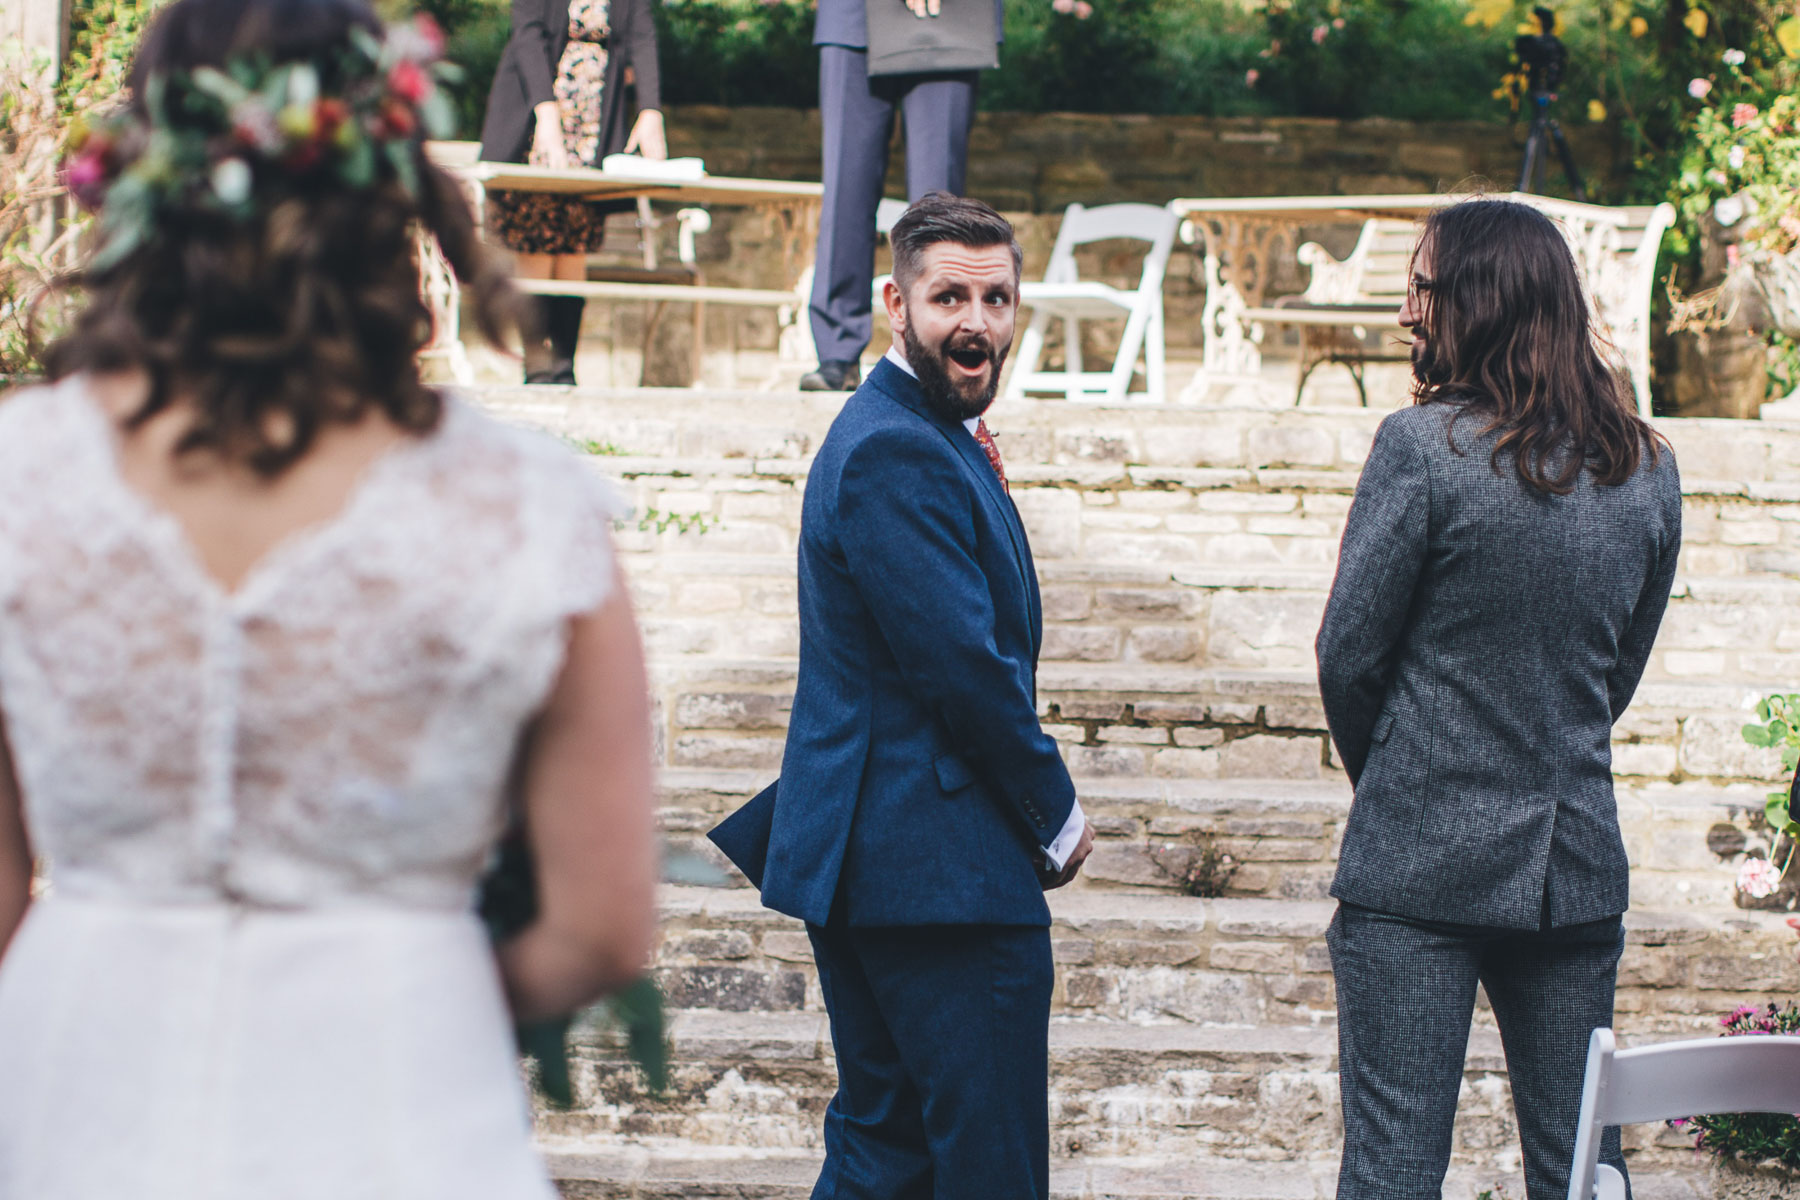 grooms shocked expression as he sees his bride come down the aisle